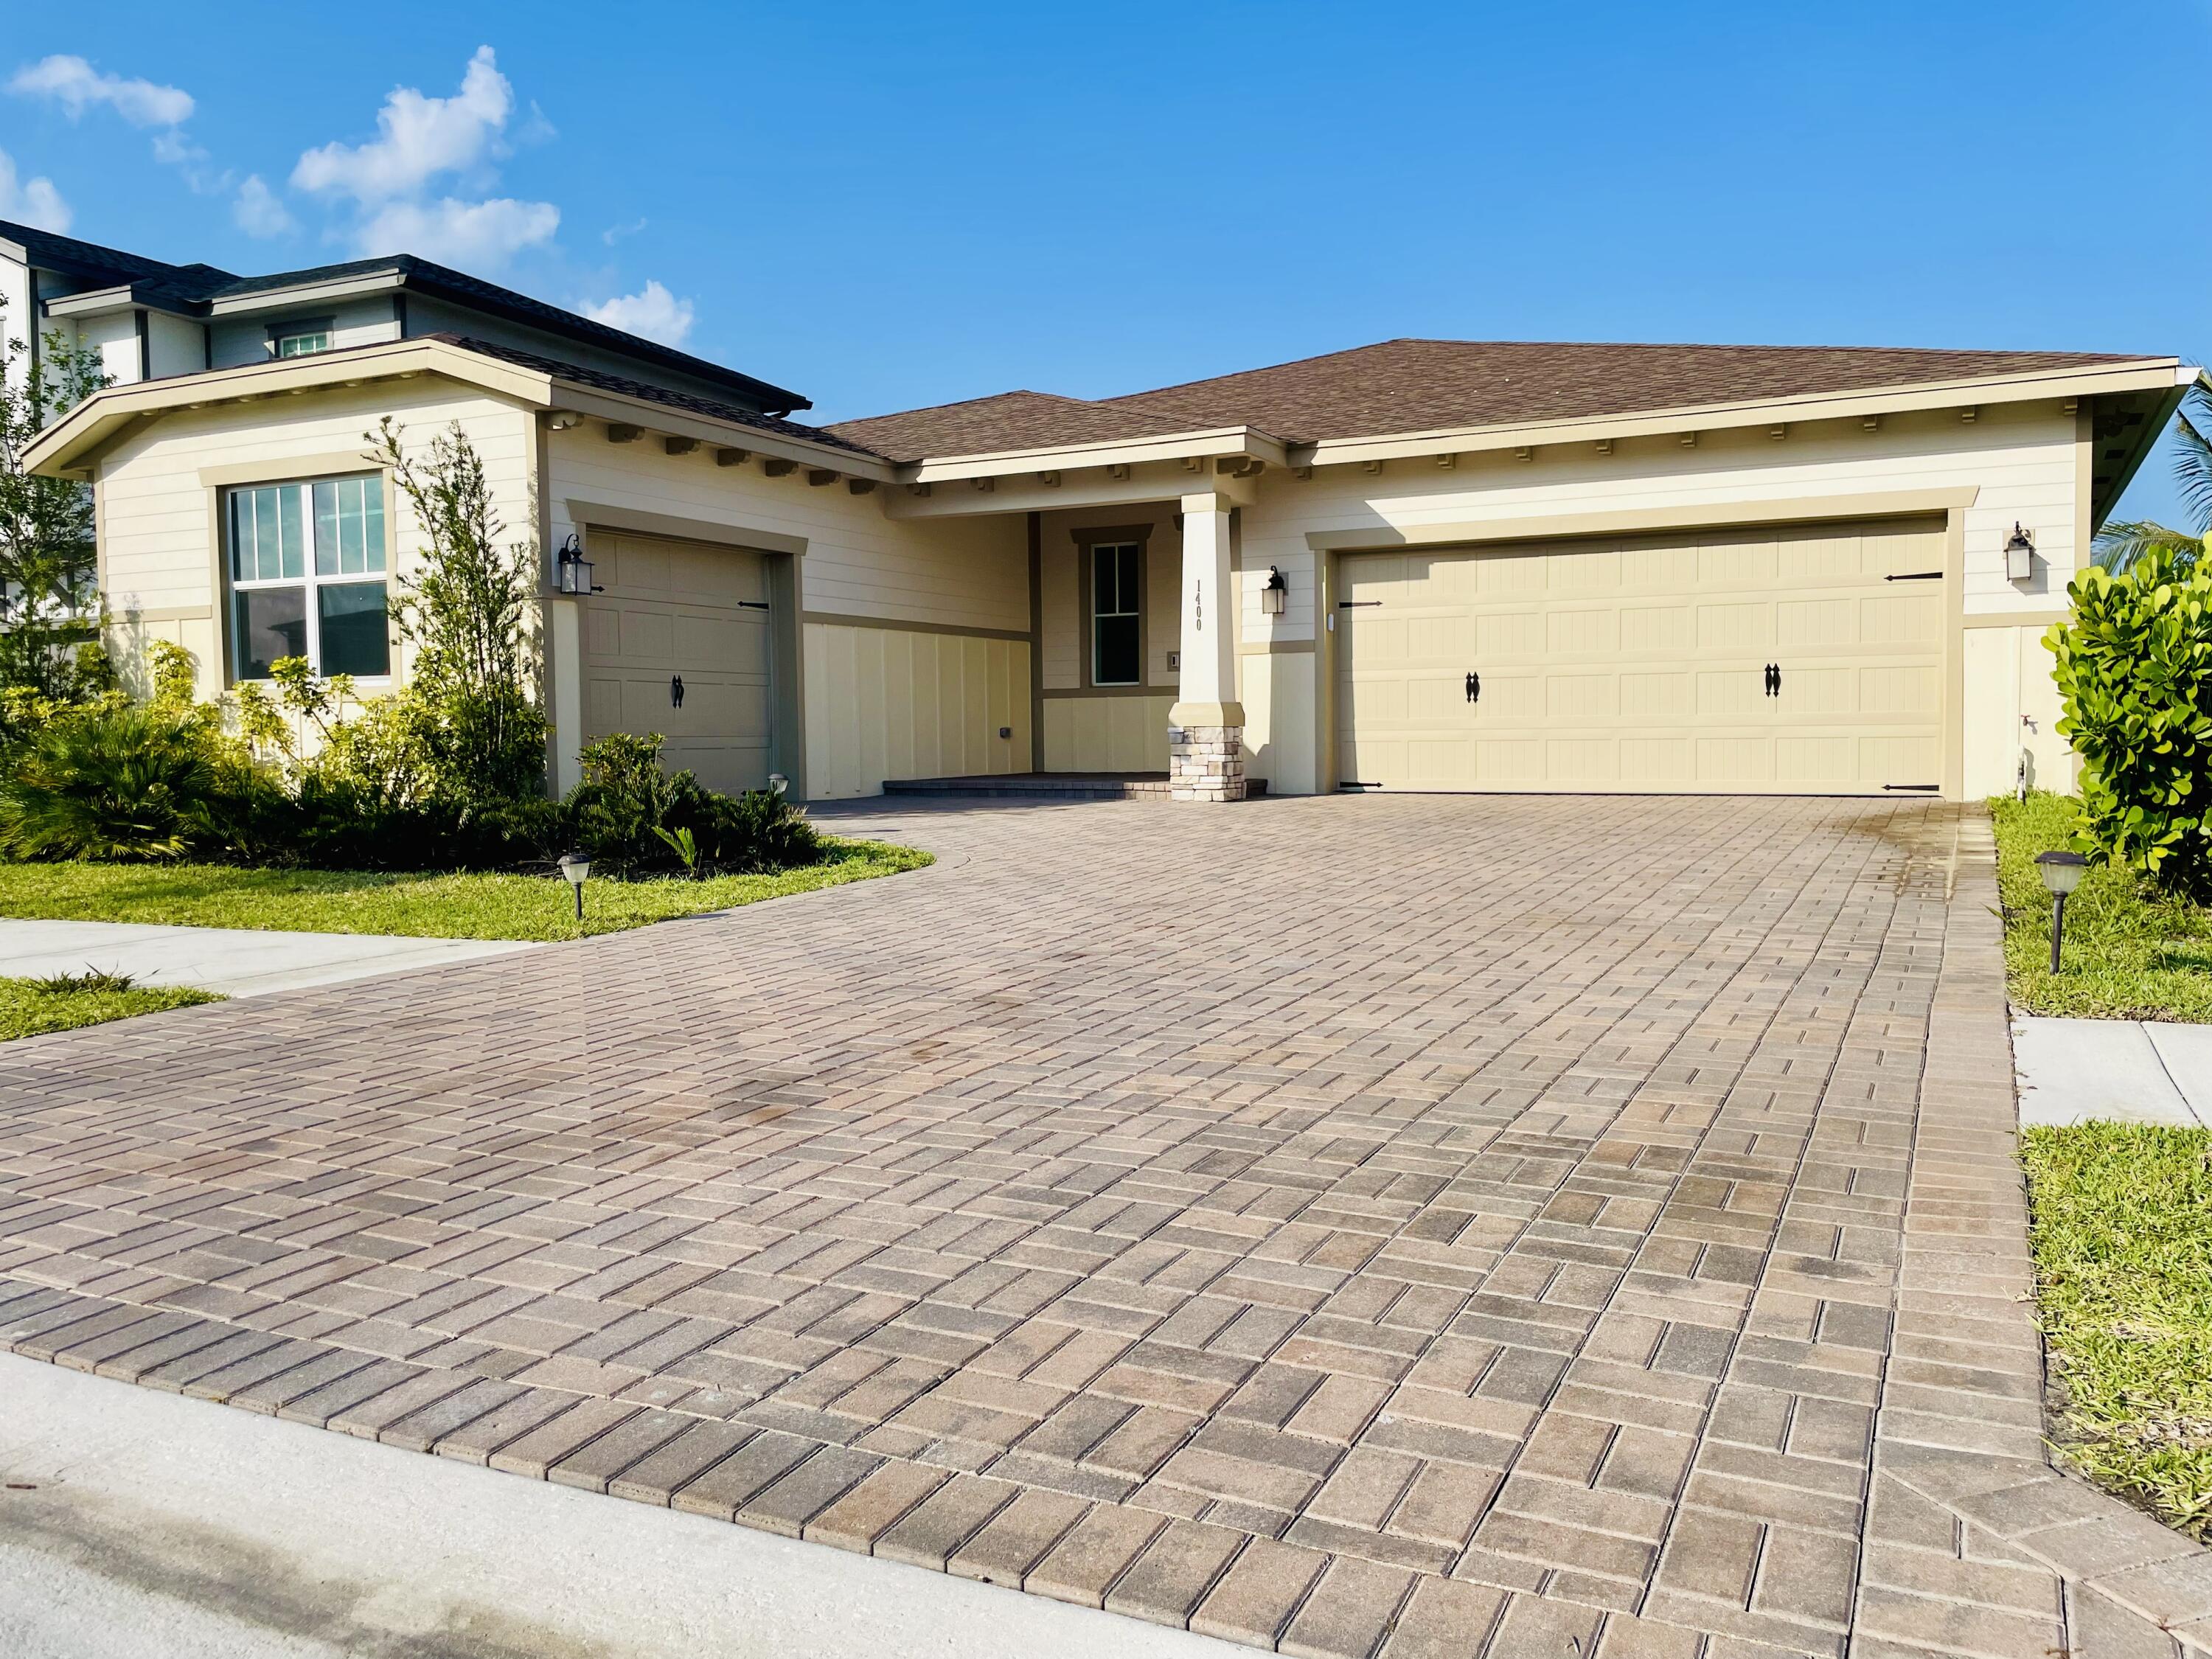 1400 Sterling Pine Place, Loxahatchee, Palm Beach County, Florida - 4 Bedrooms  
3 Bathrooms - 